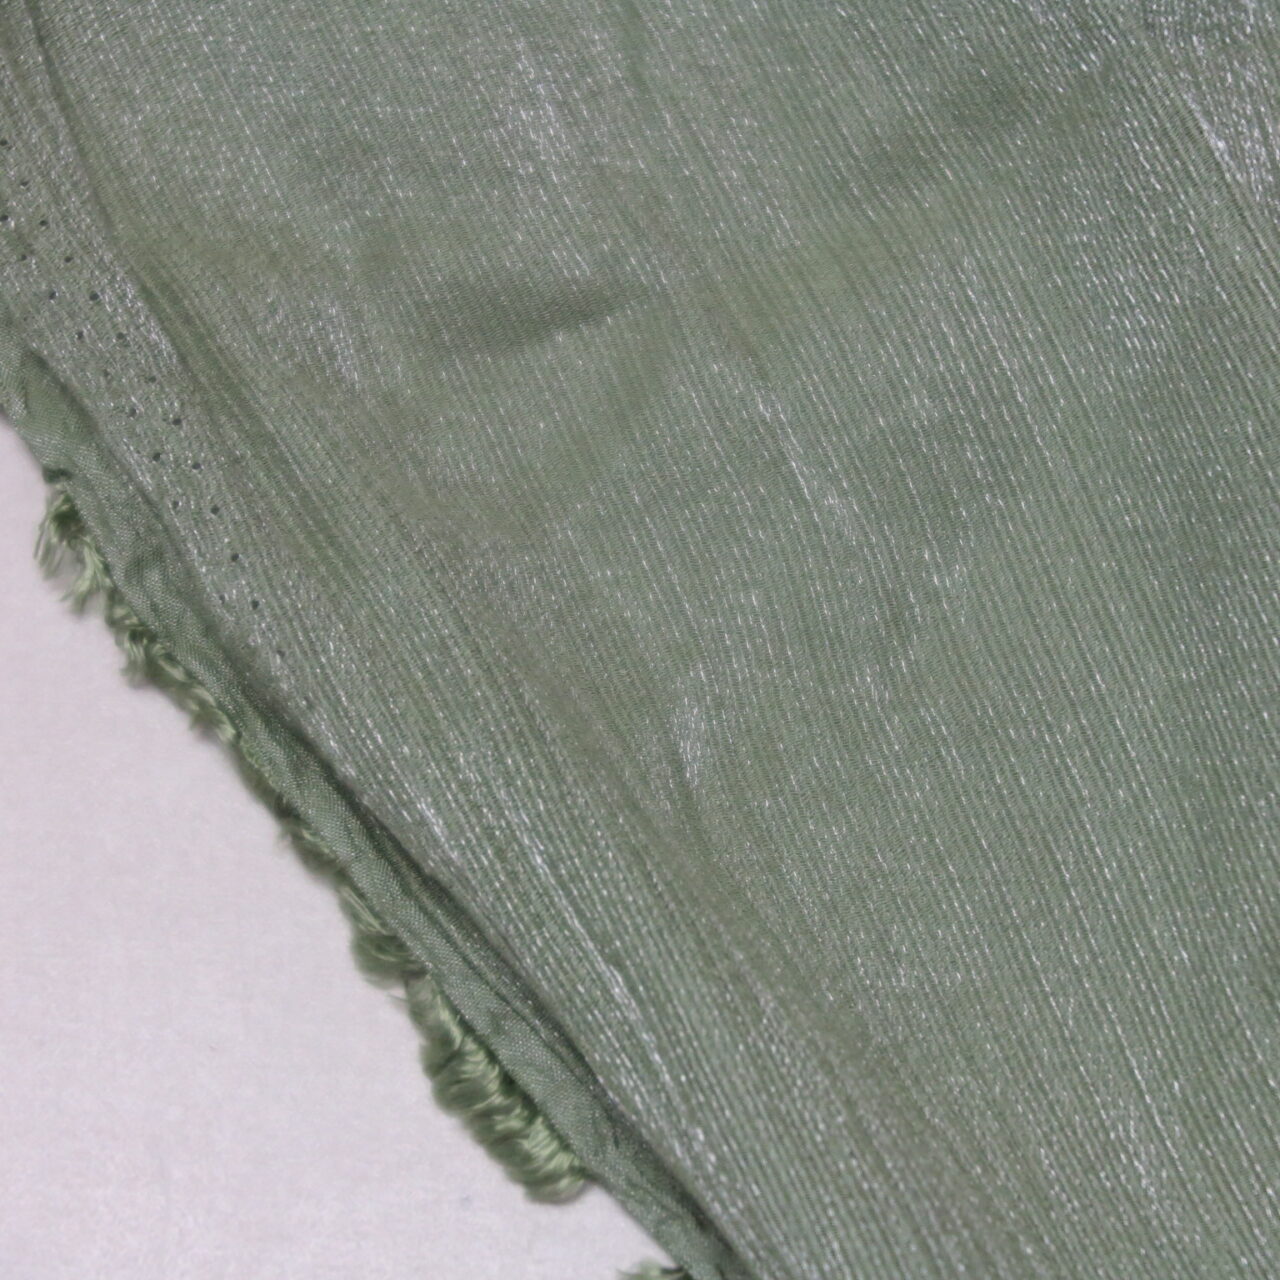 Viscose Blend Light Weight Fabric with Stretch, Pleated with Lustrous ...